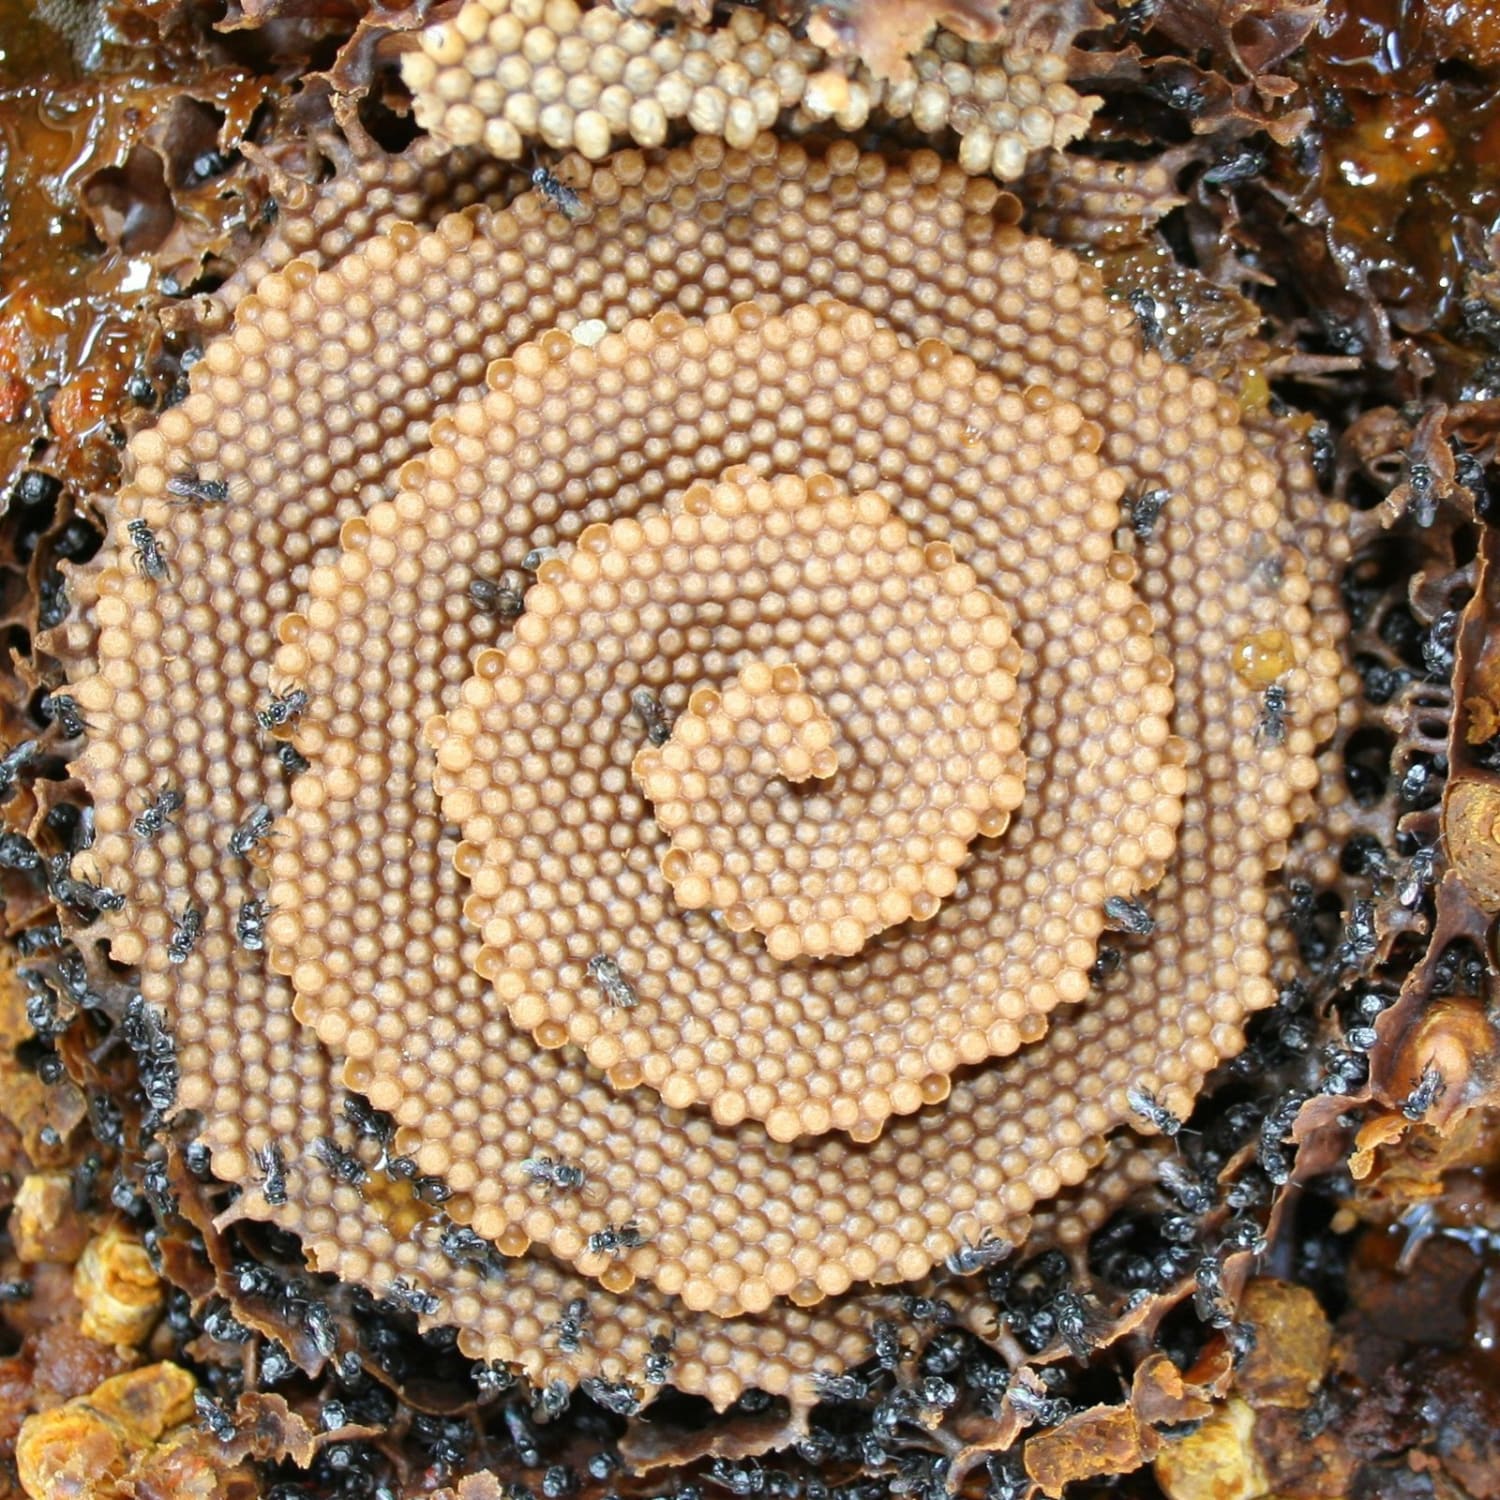 Scientists Crack the Mathematical Mystery of Stingless Bees' Spiral Honeycombs